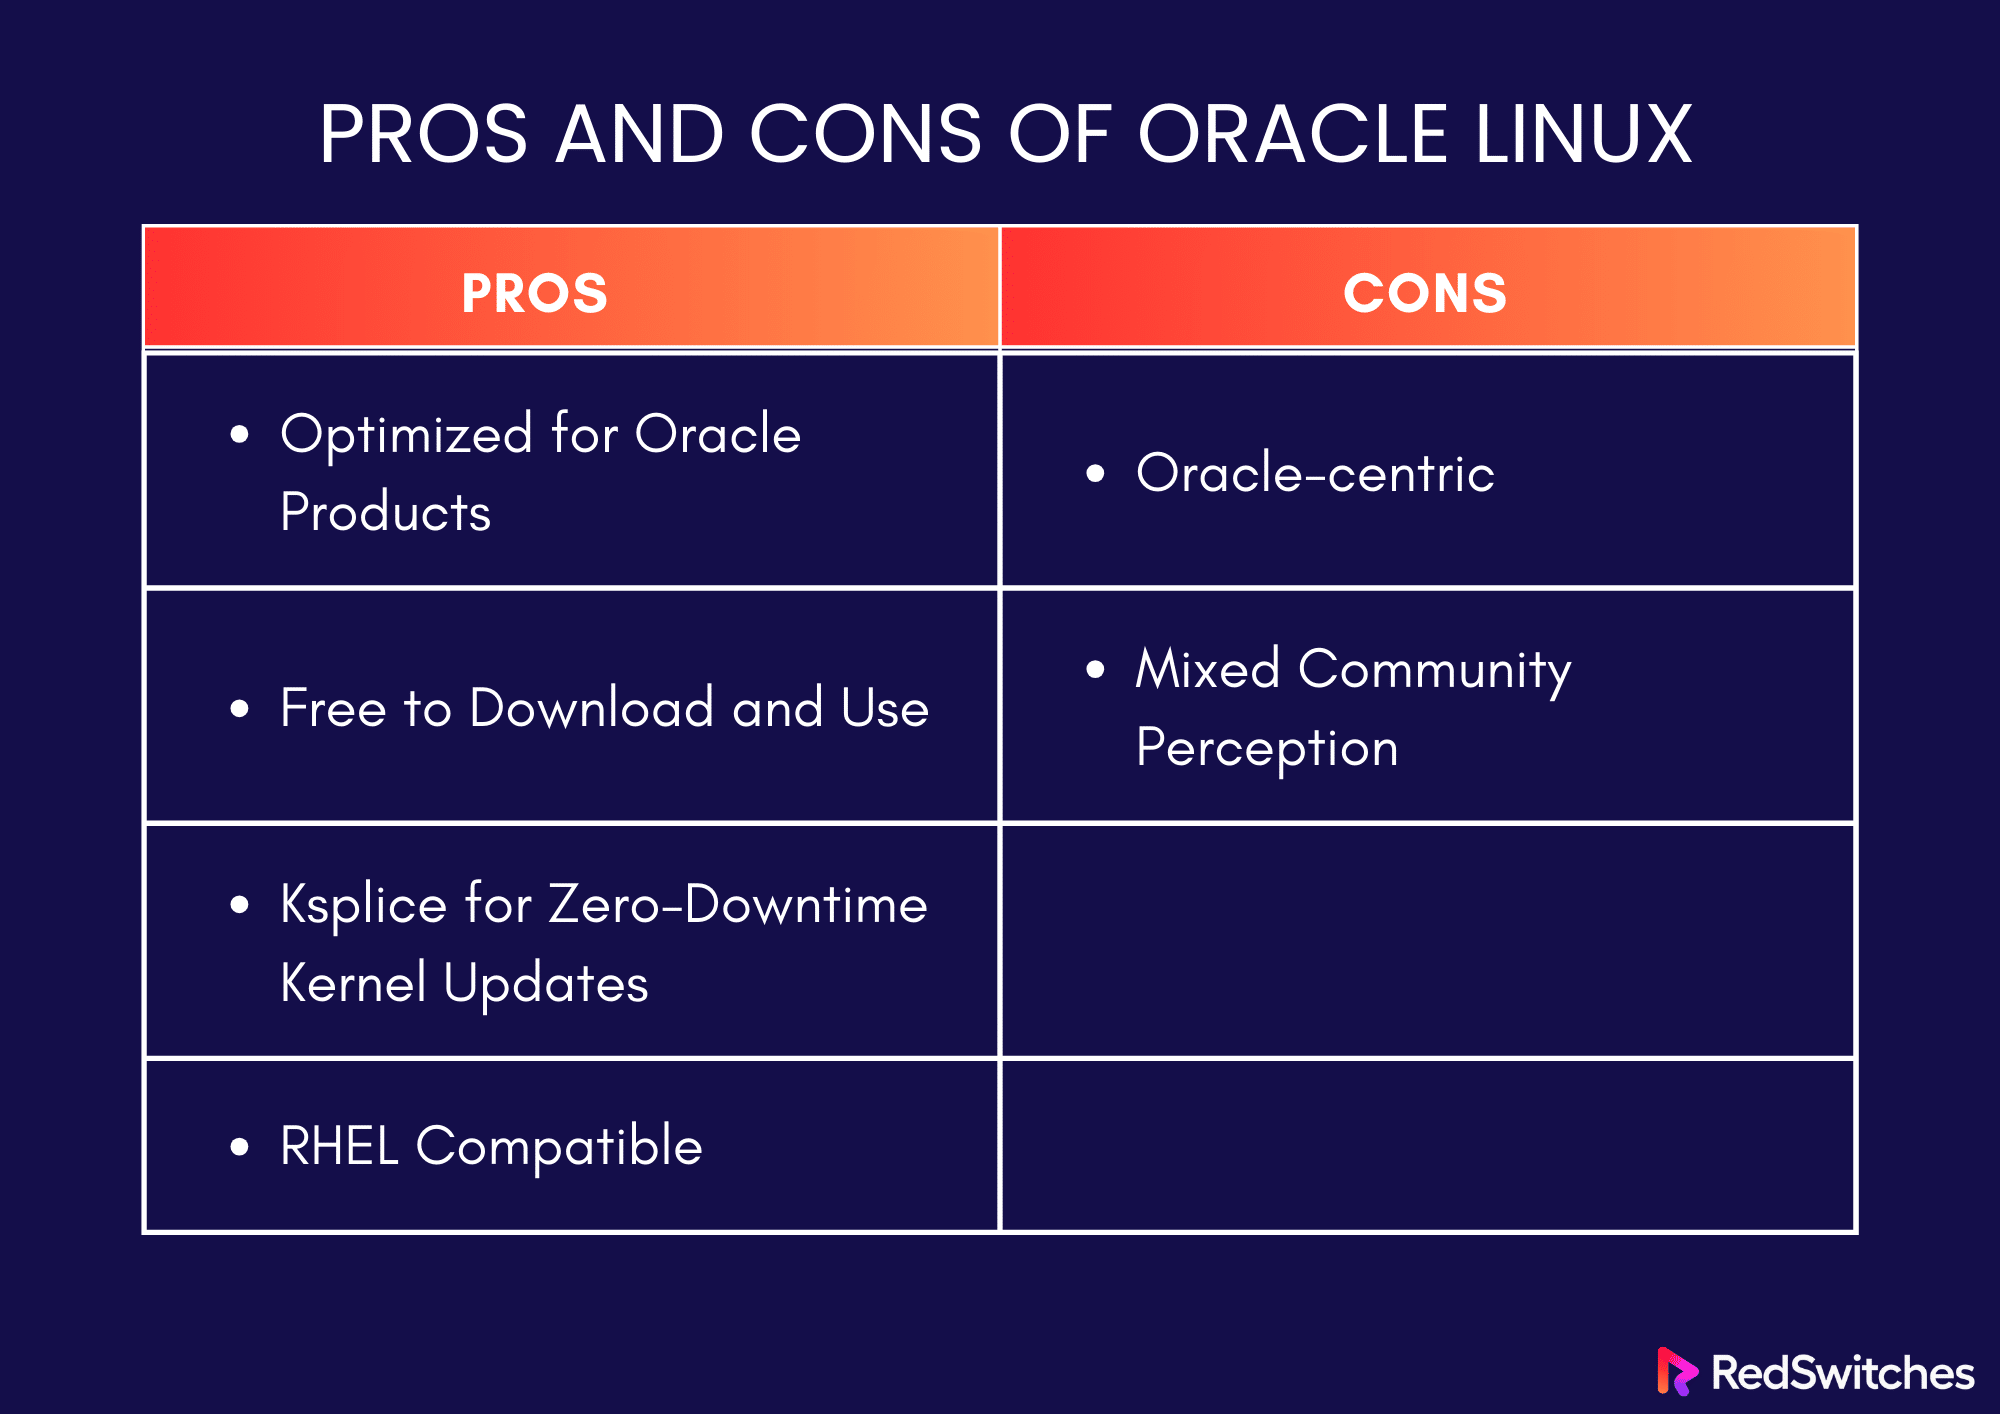 Pros and Cons of Oracle Linux